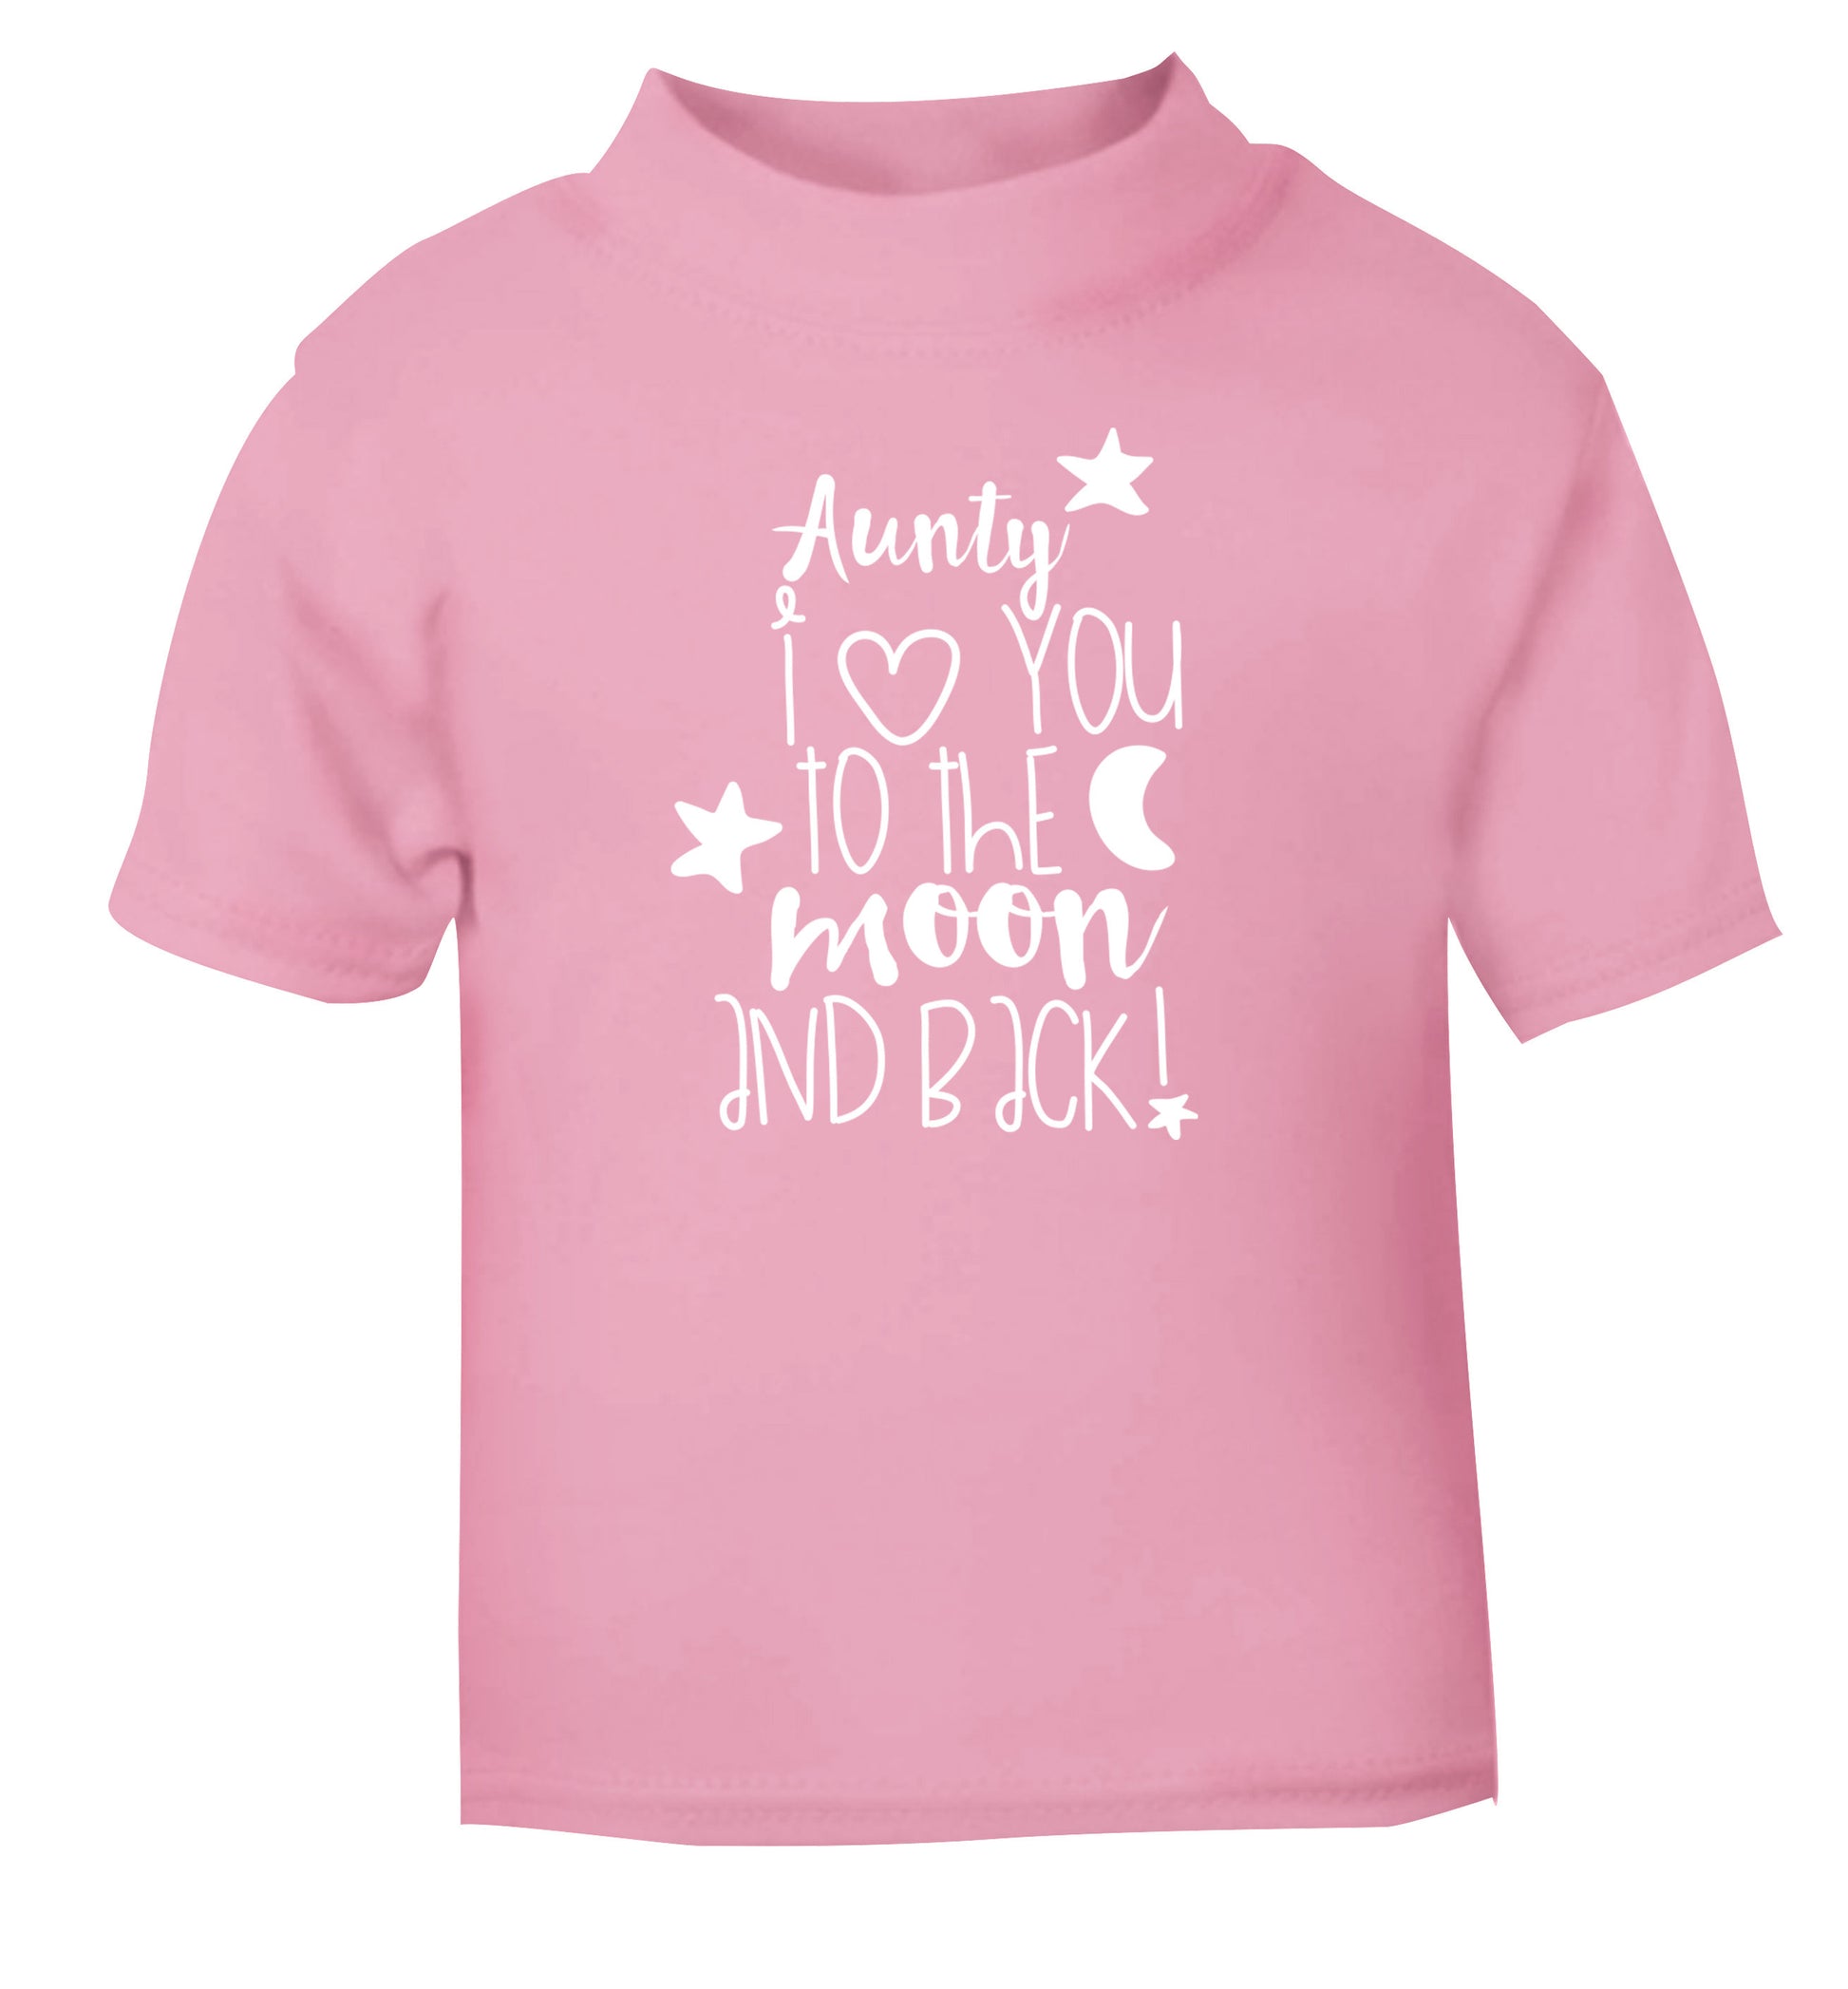 Aunty I love you to the moon and back light pink Baby Toddler Tshirt 2 Years